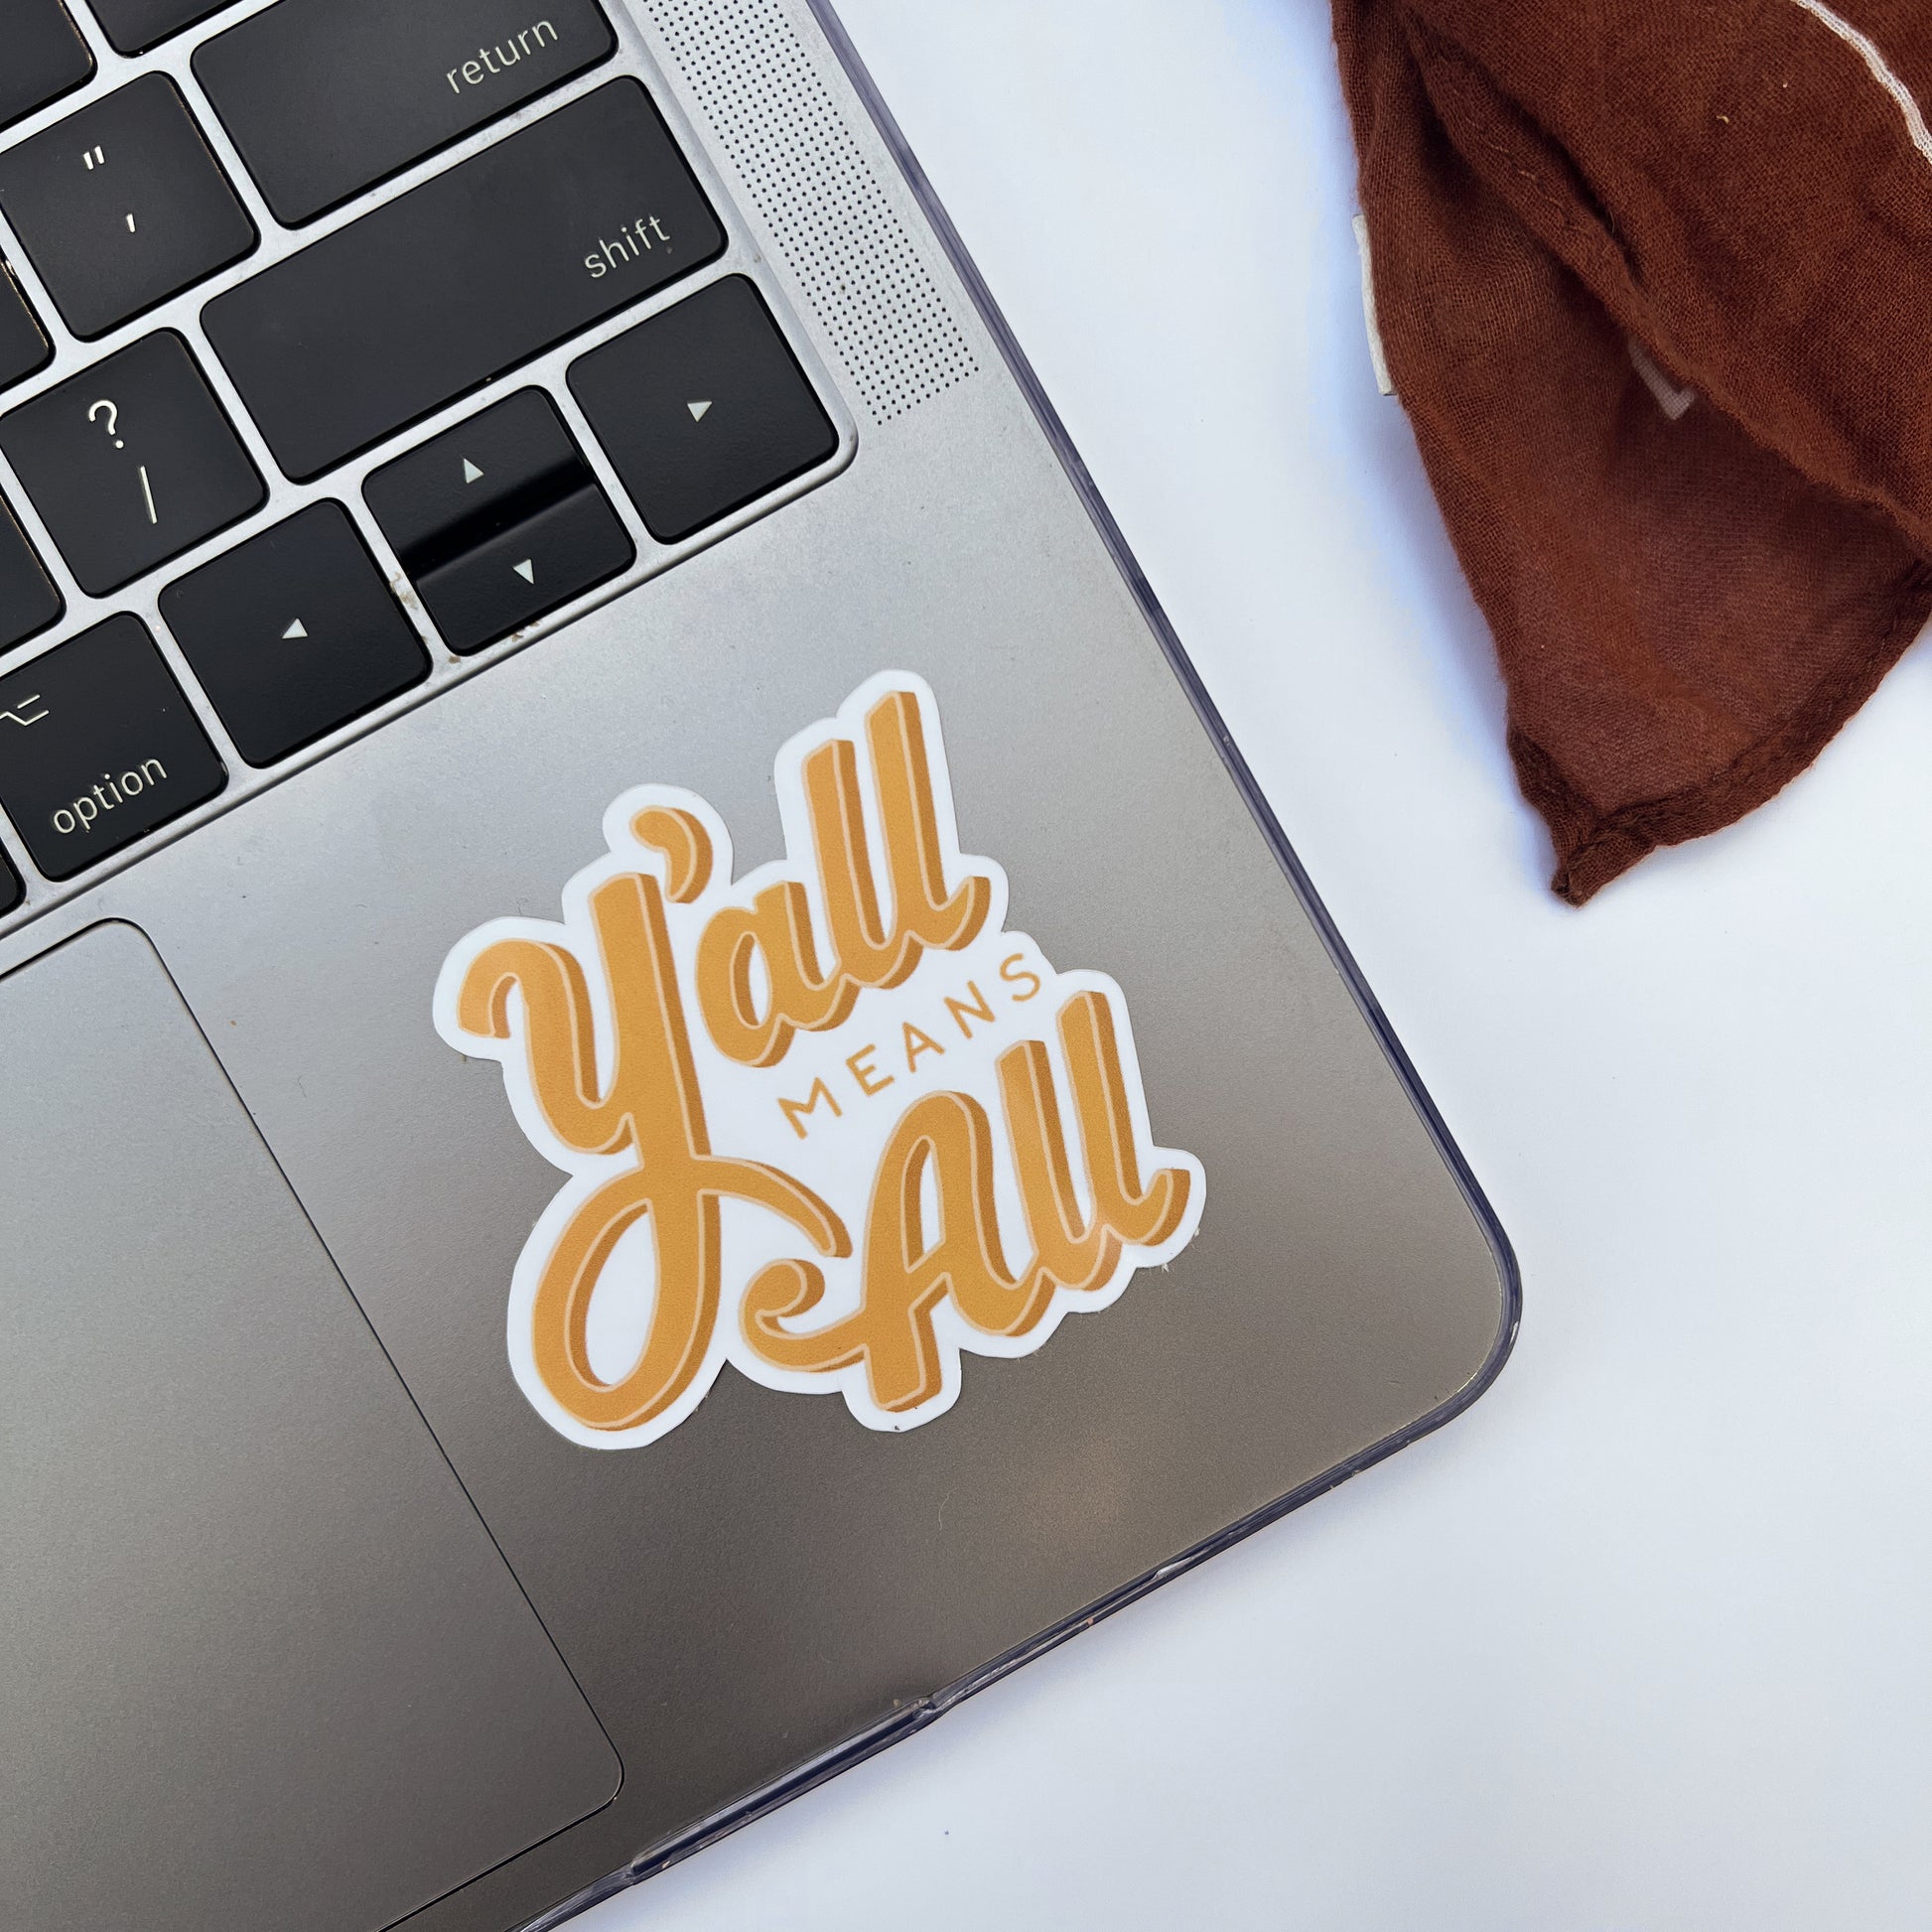 Yellow "Y'all Means All" Sticker displayed on laptop.